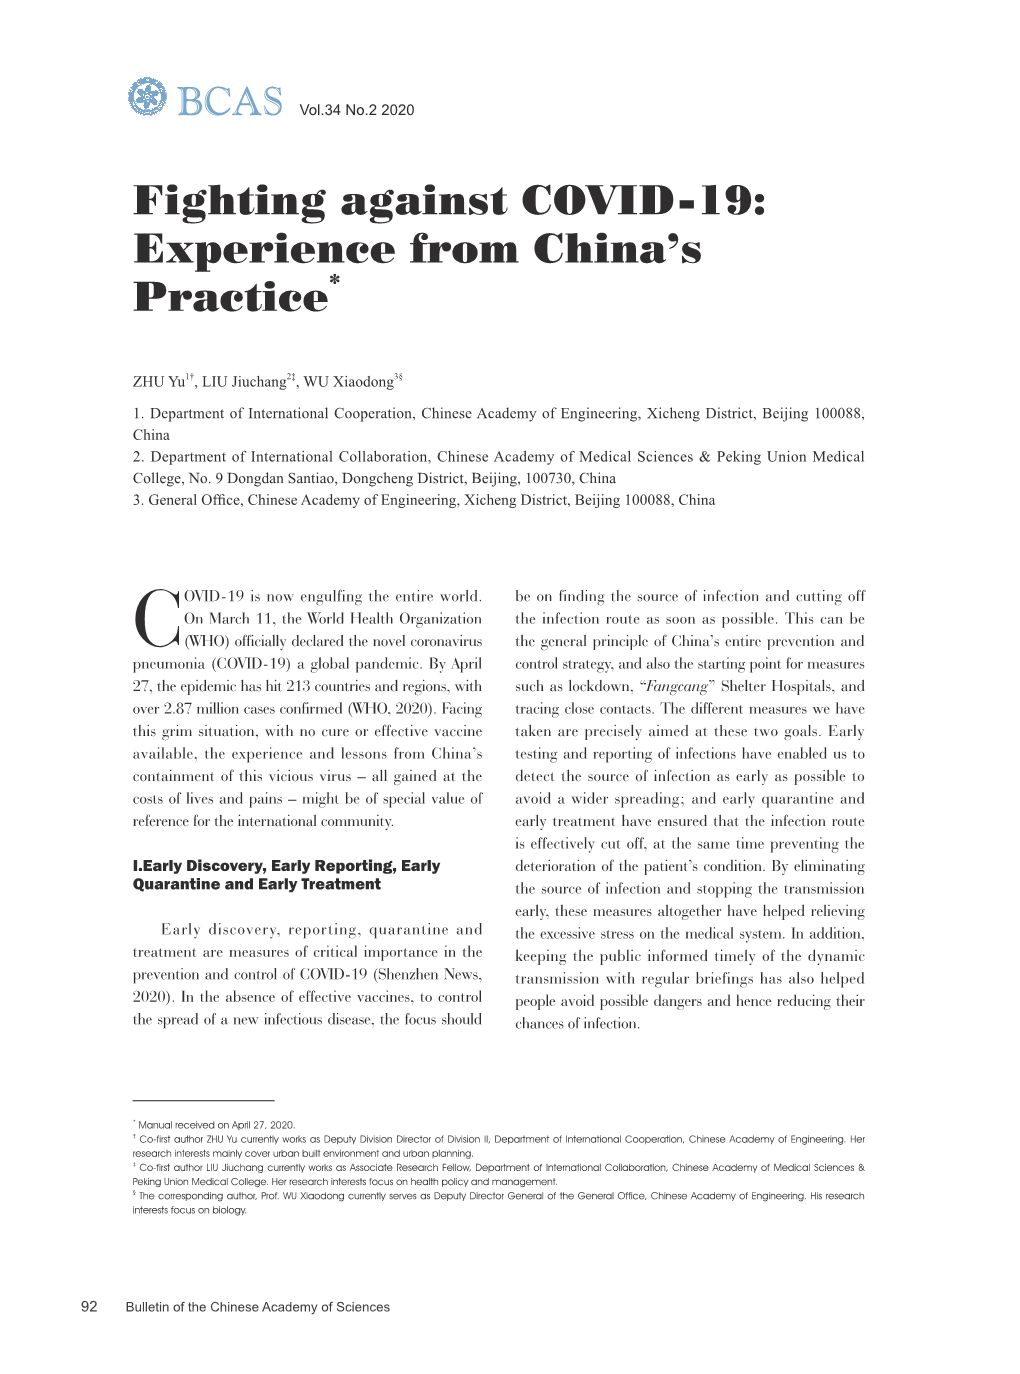 Fighting Against COVID-19: Experience from China’S Practice*